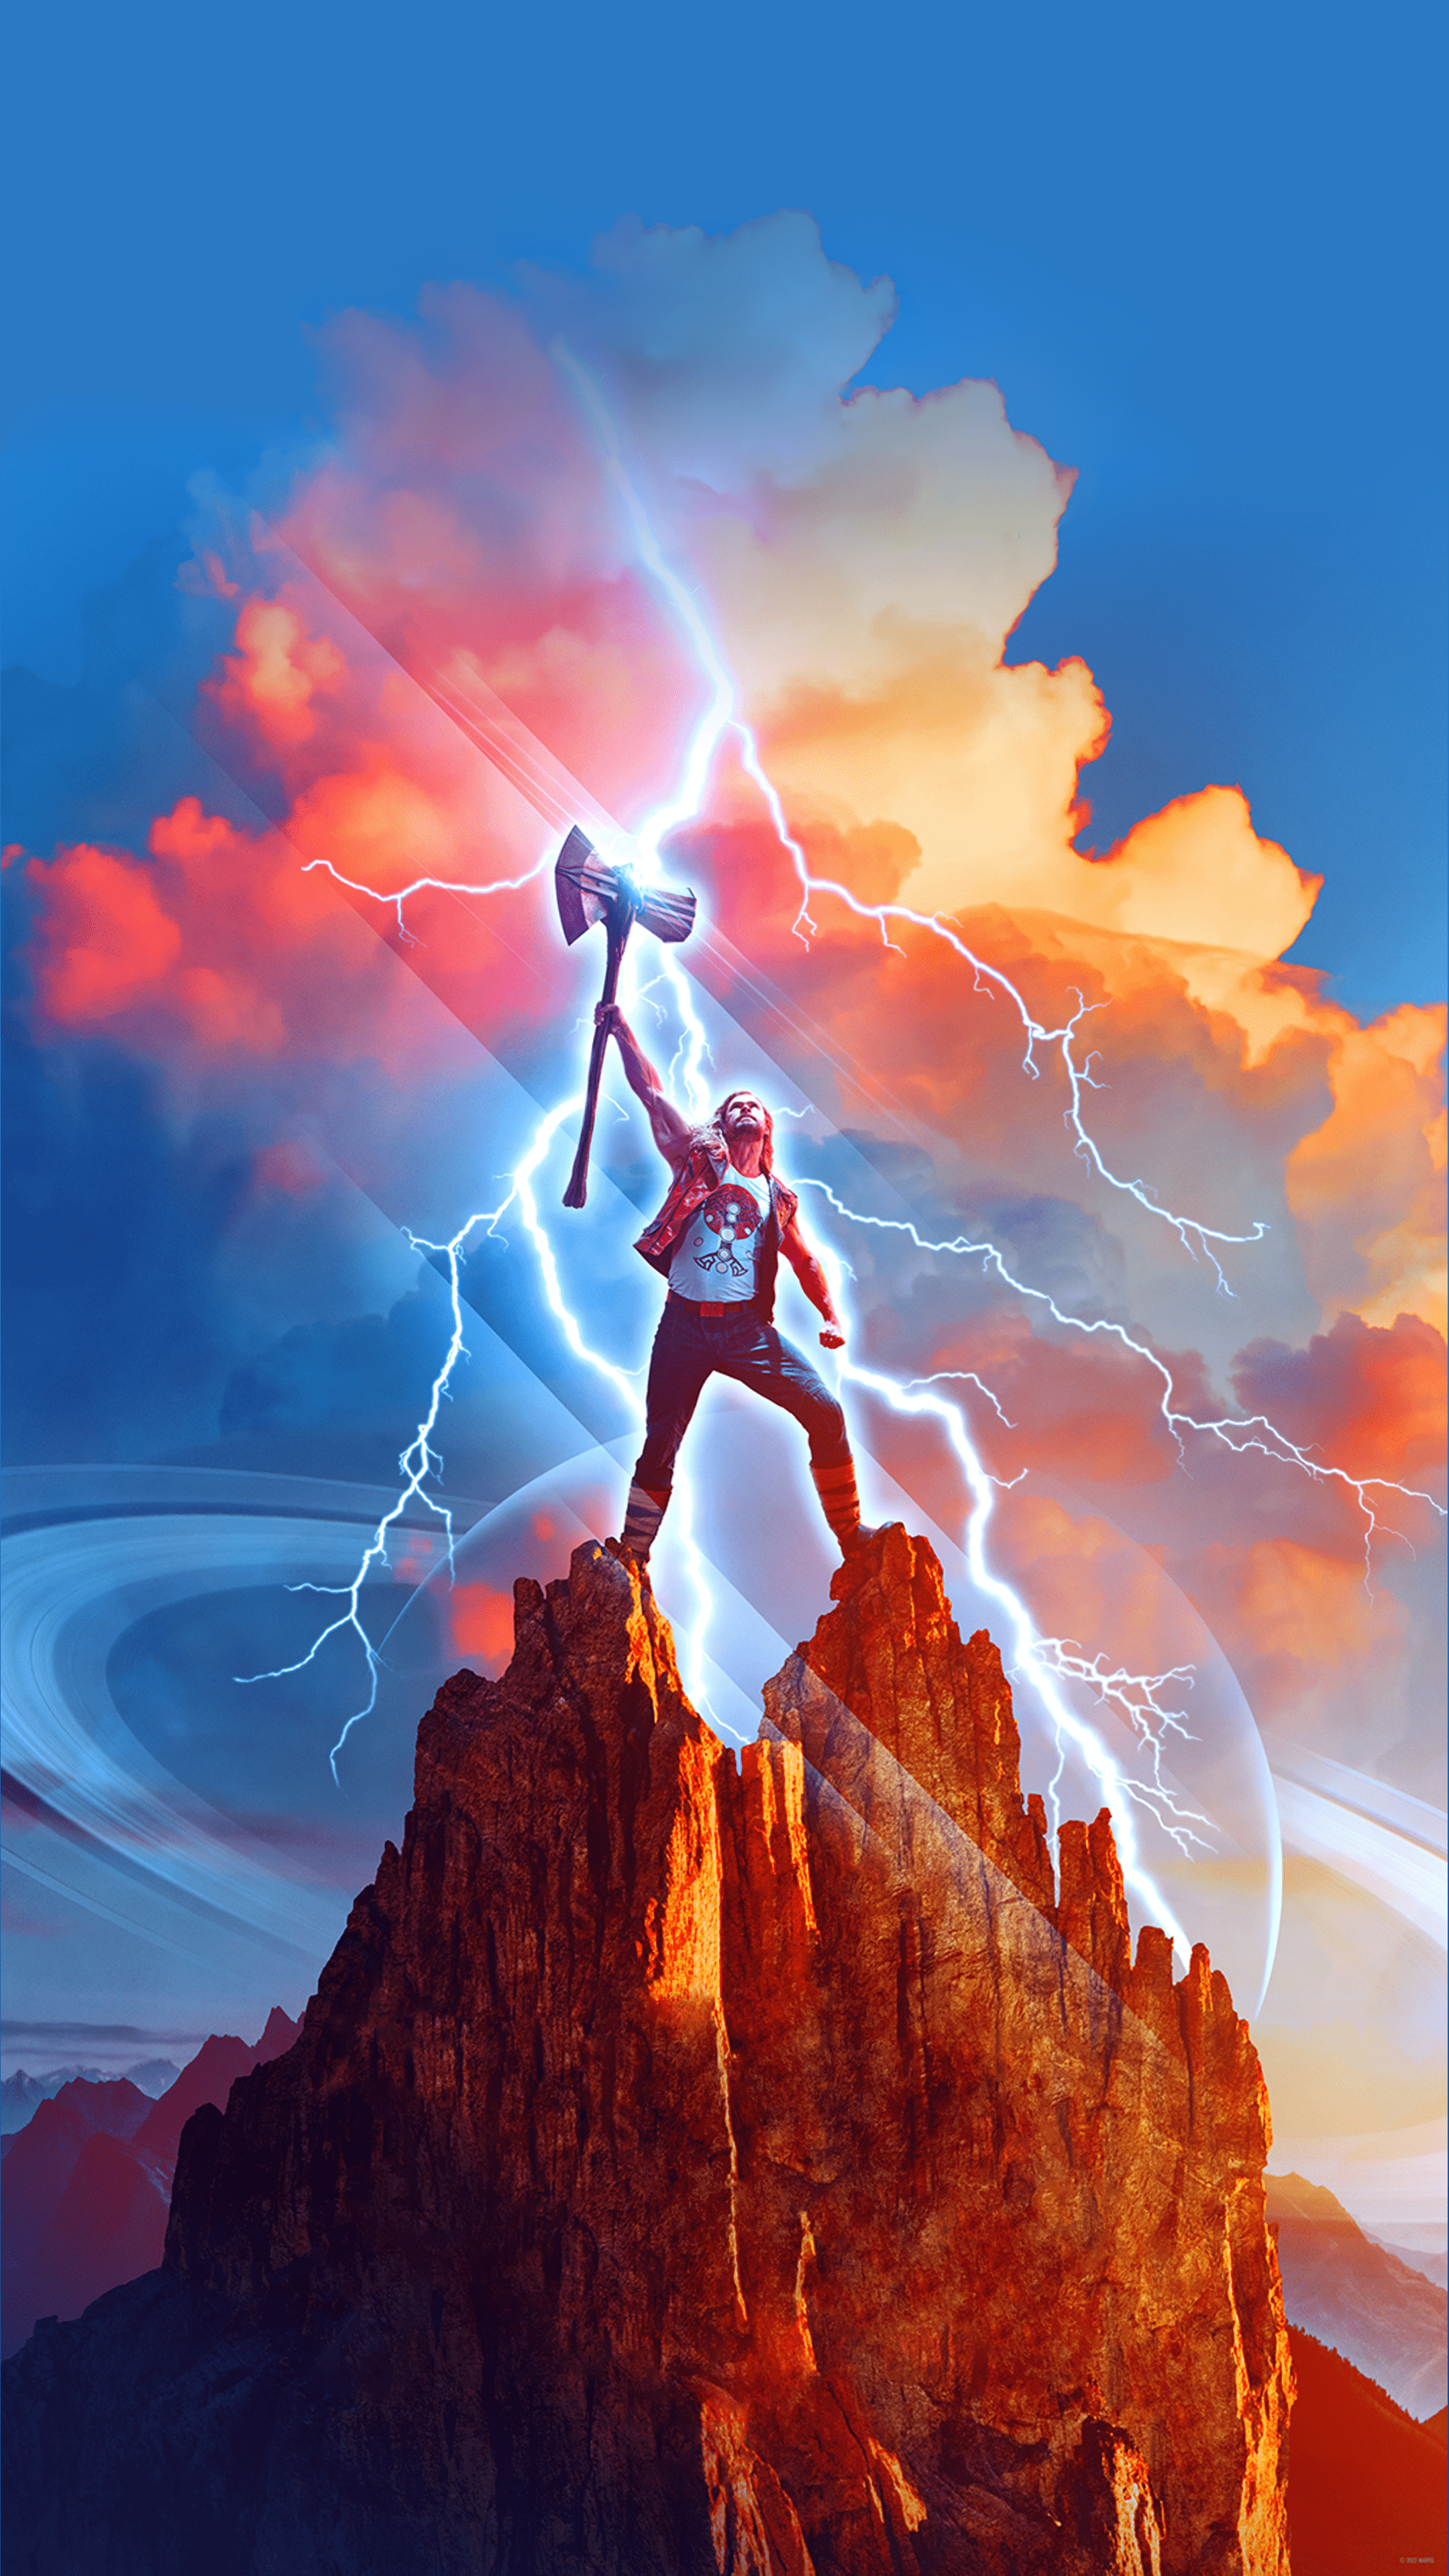 A man with a hammer stands on a mountain, lightning around him - Thor